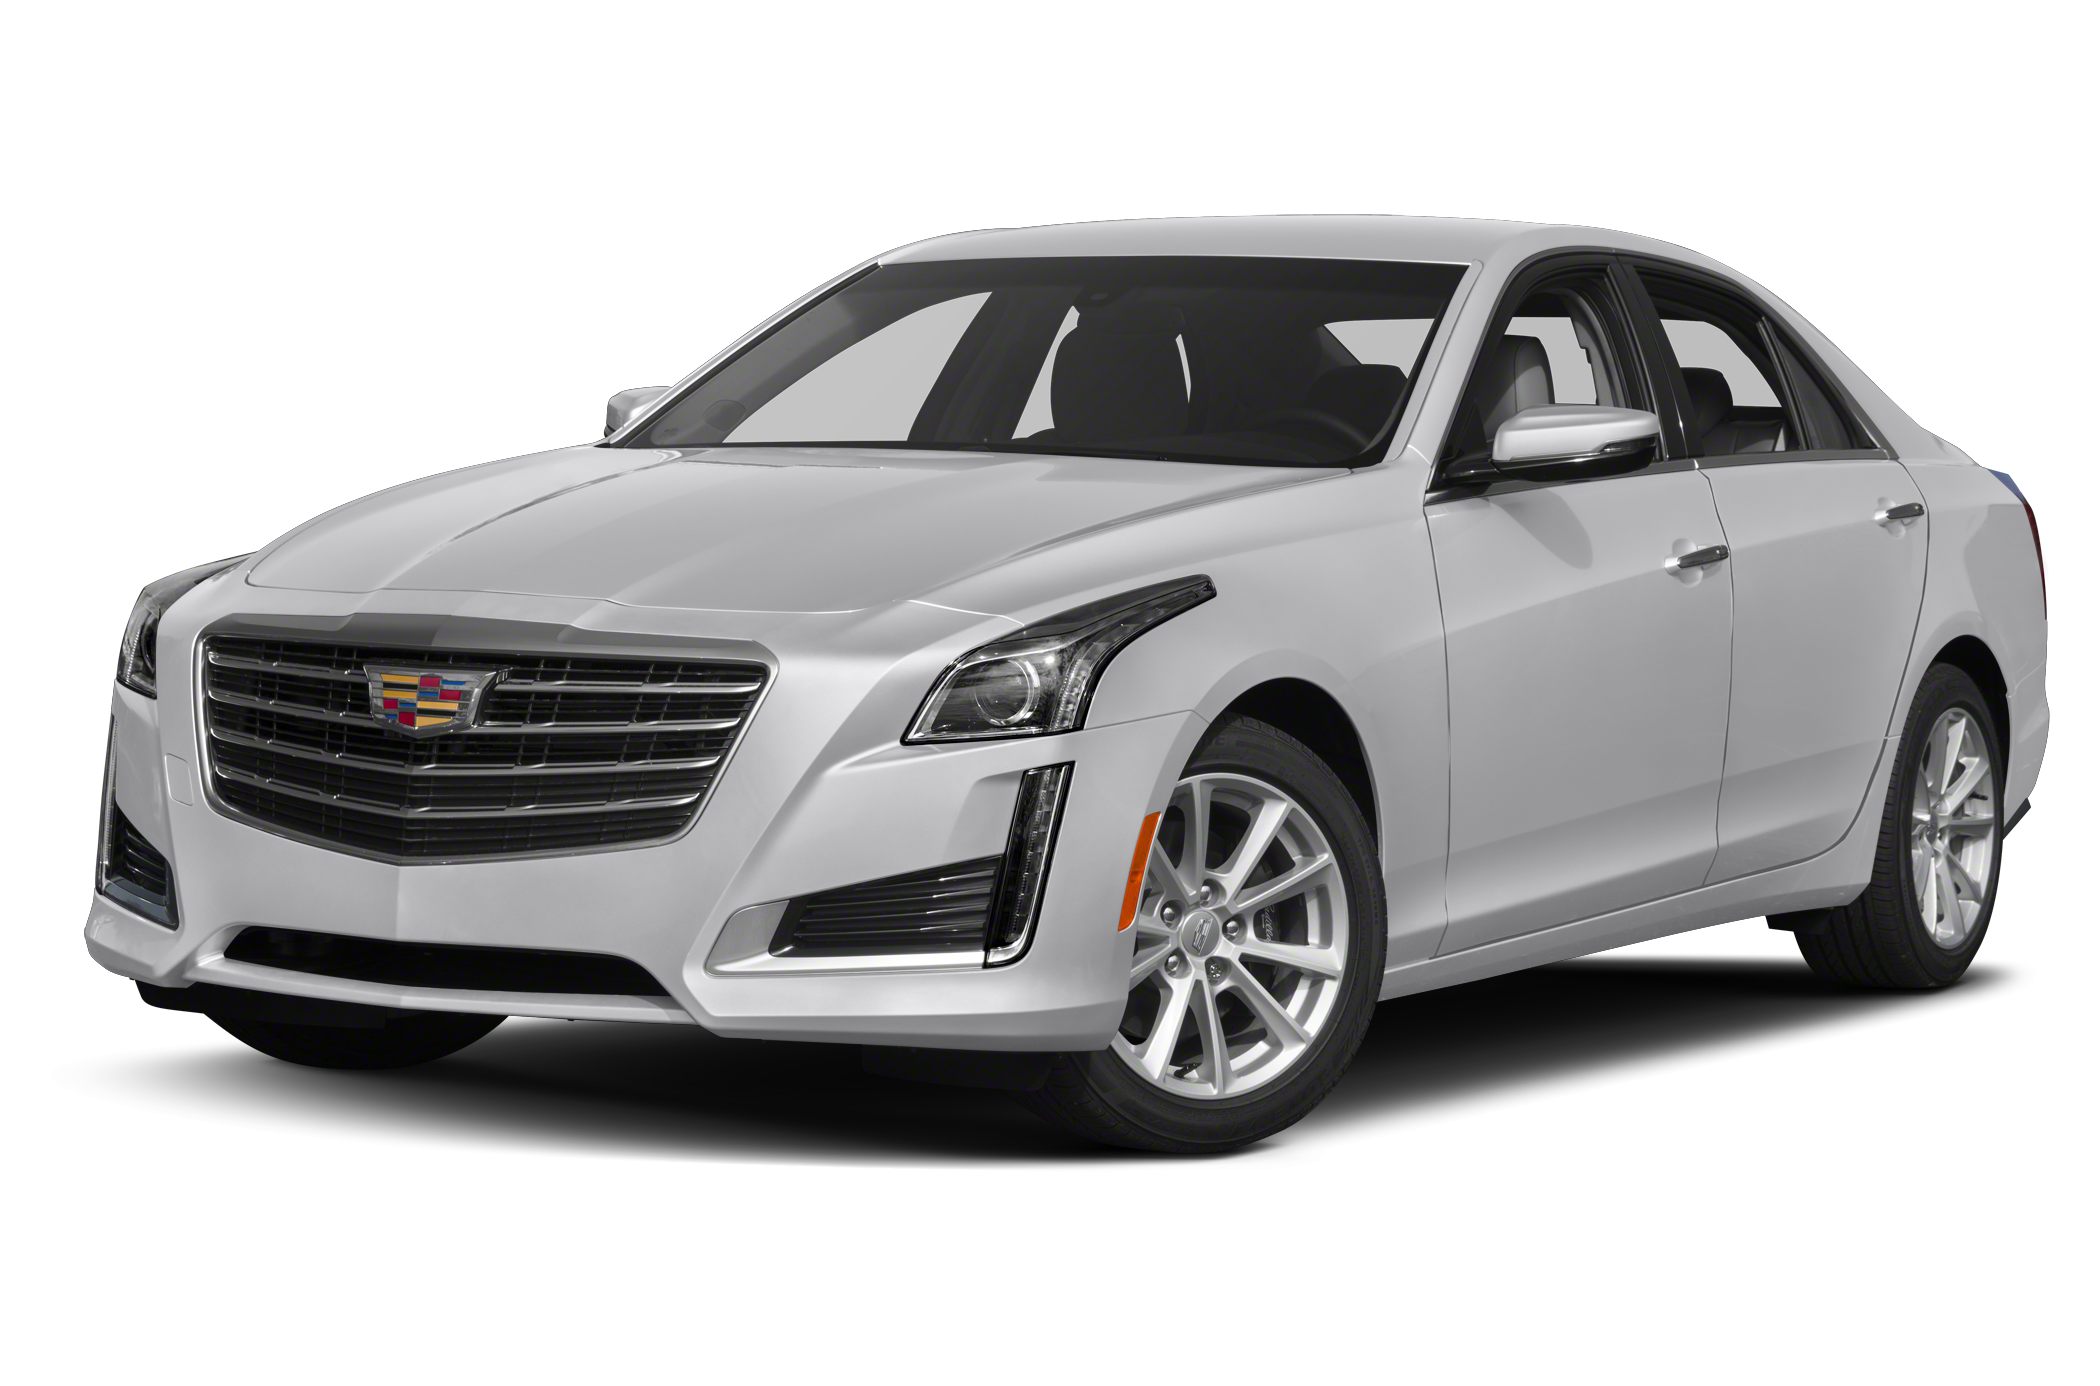 2016 Cadillac CTS Test 8211 Review 8211 Car and Driver